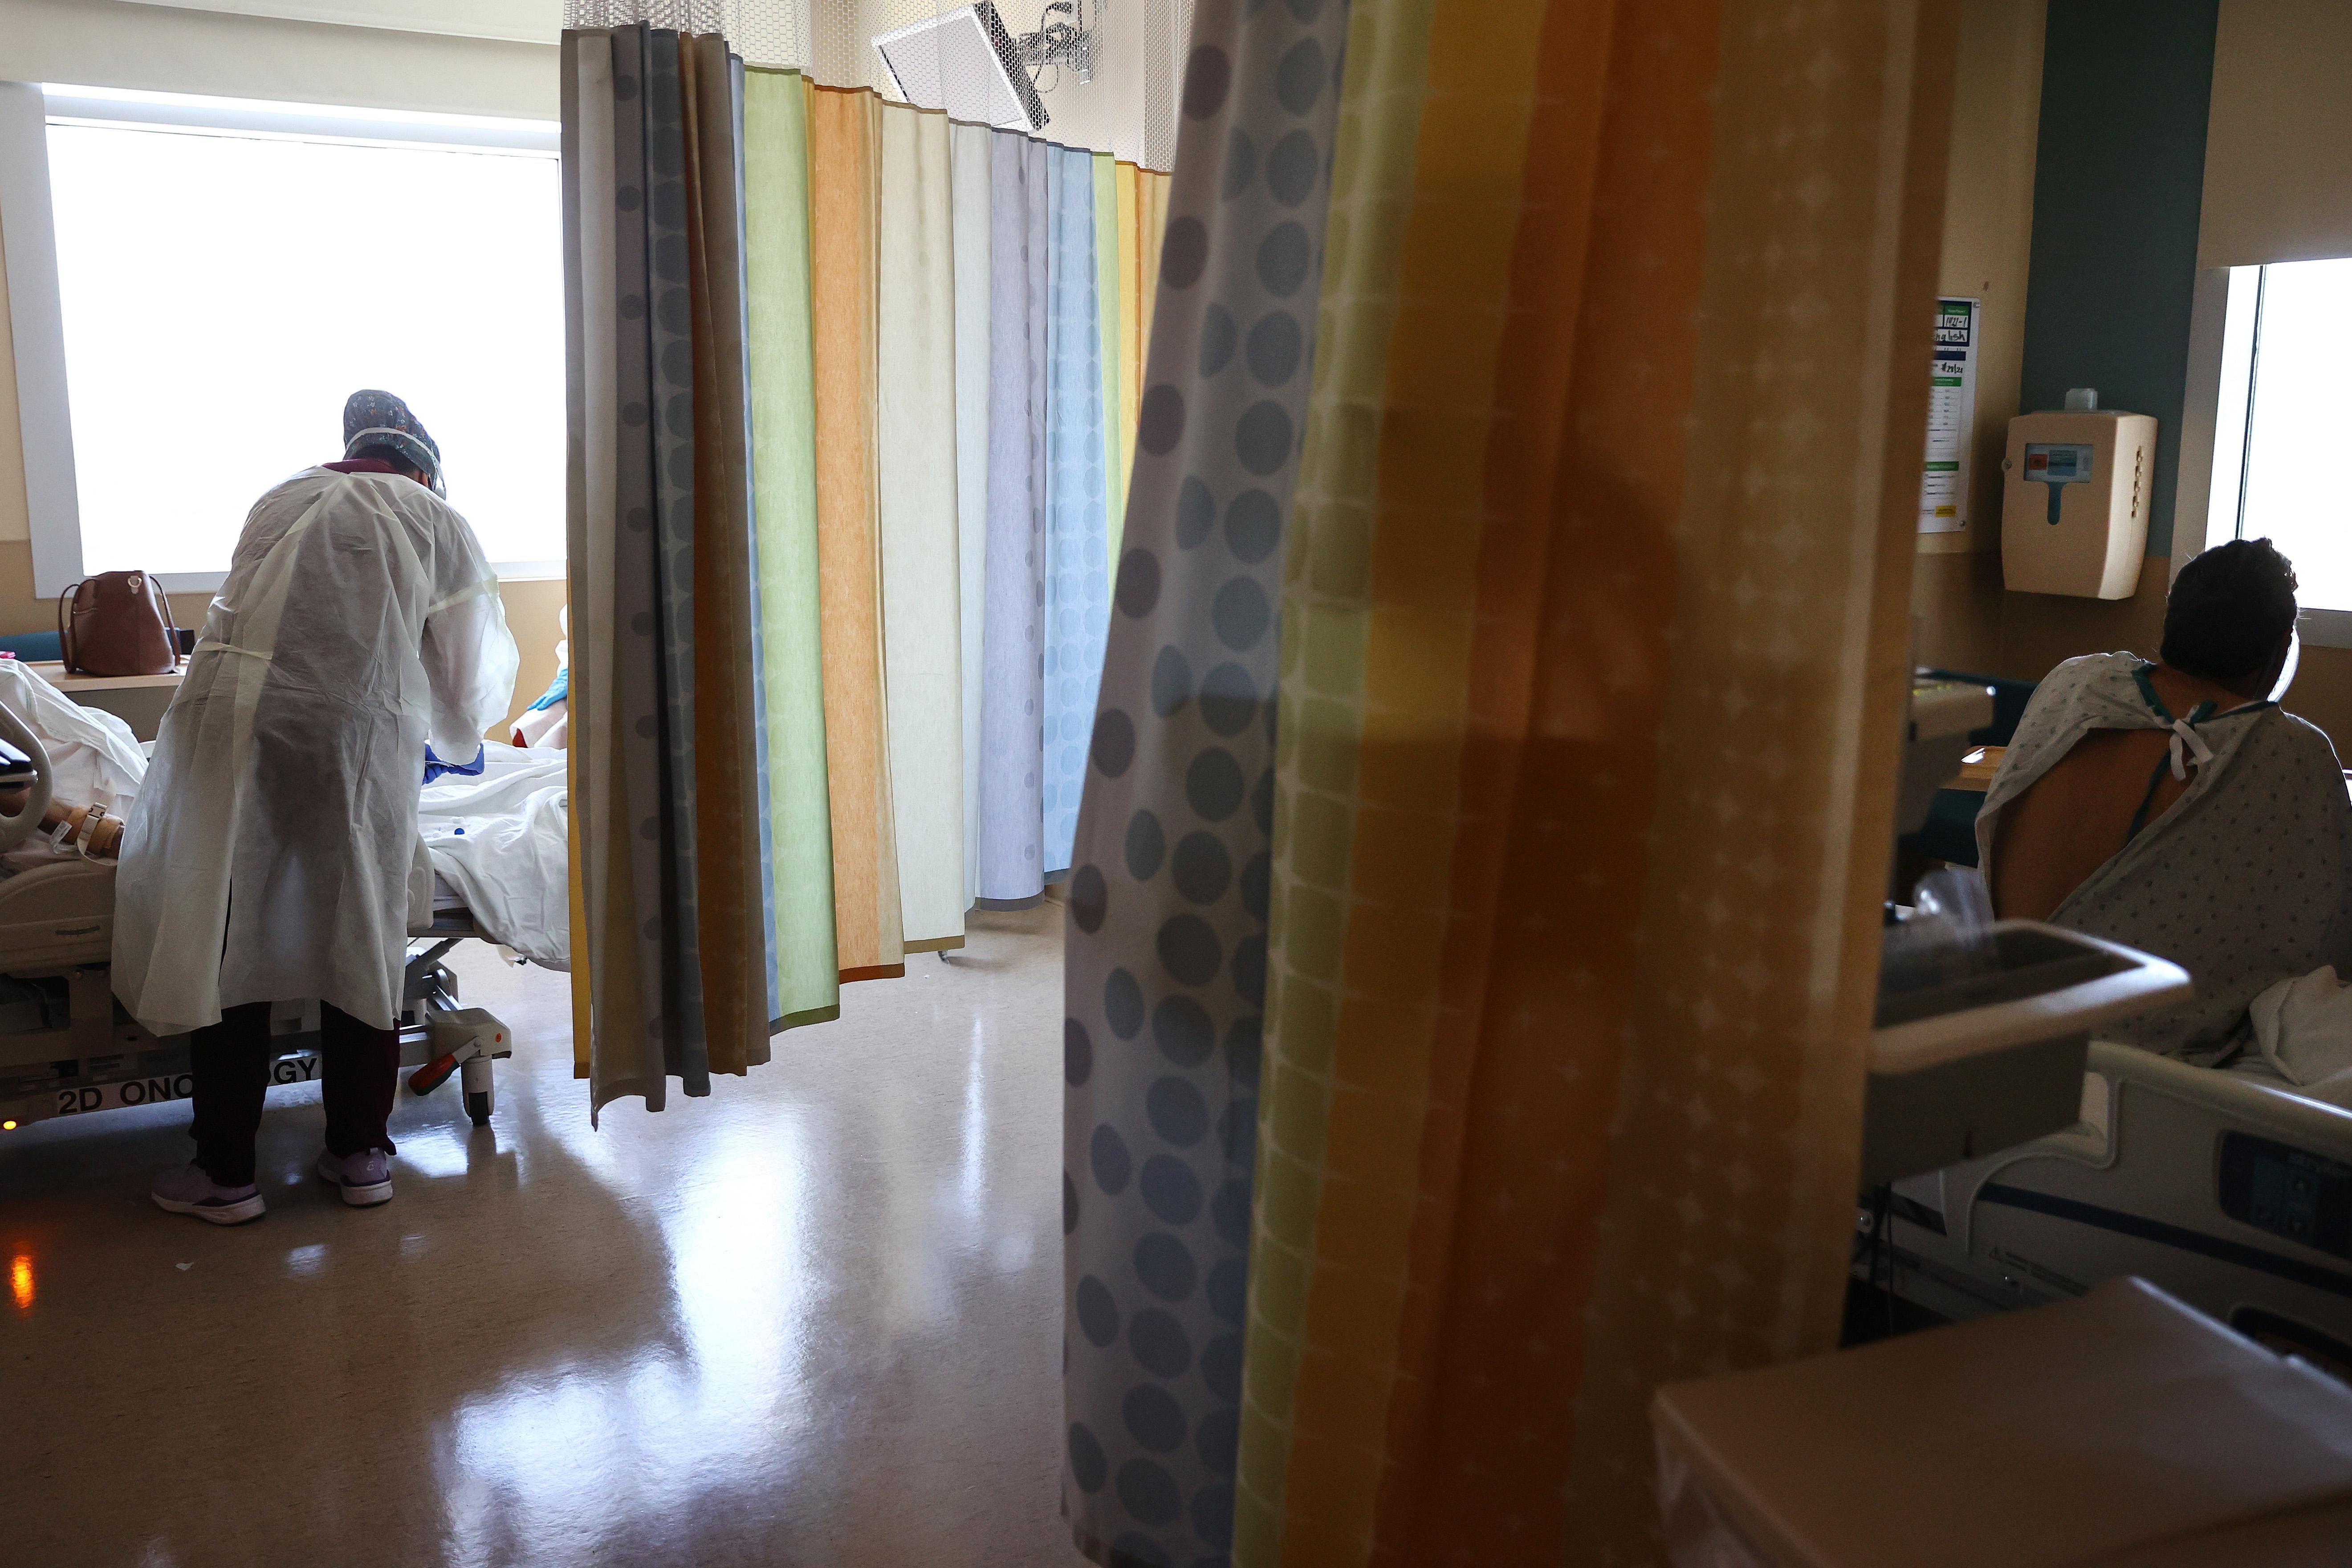 A registered nurse seen from behind caring for a COVID-19 patient as another COVID-19 patient rests in the improvised COVID-19 unit at Providence Holy Cross Medical Center in the Mission Hills neighborhood on July 30, 2021 in Los Angeles, California. 